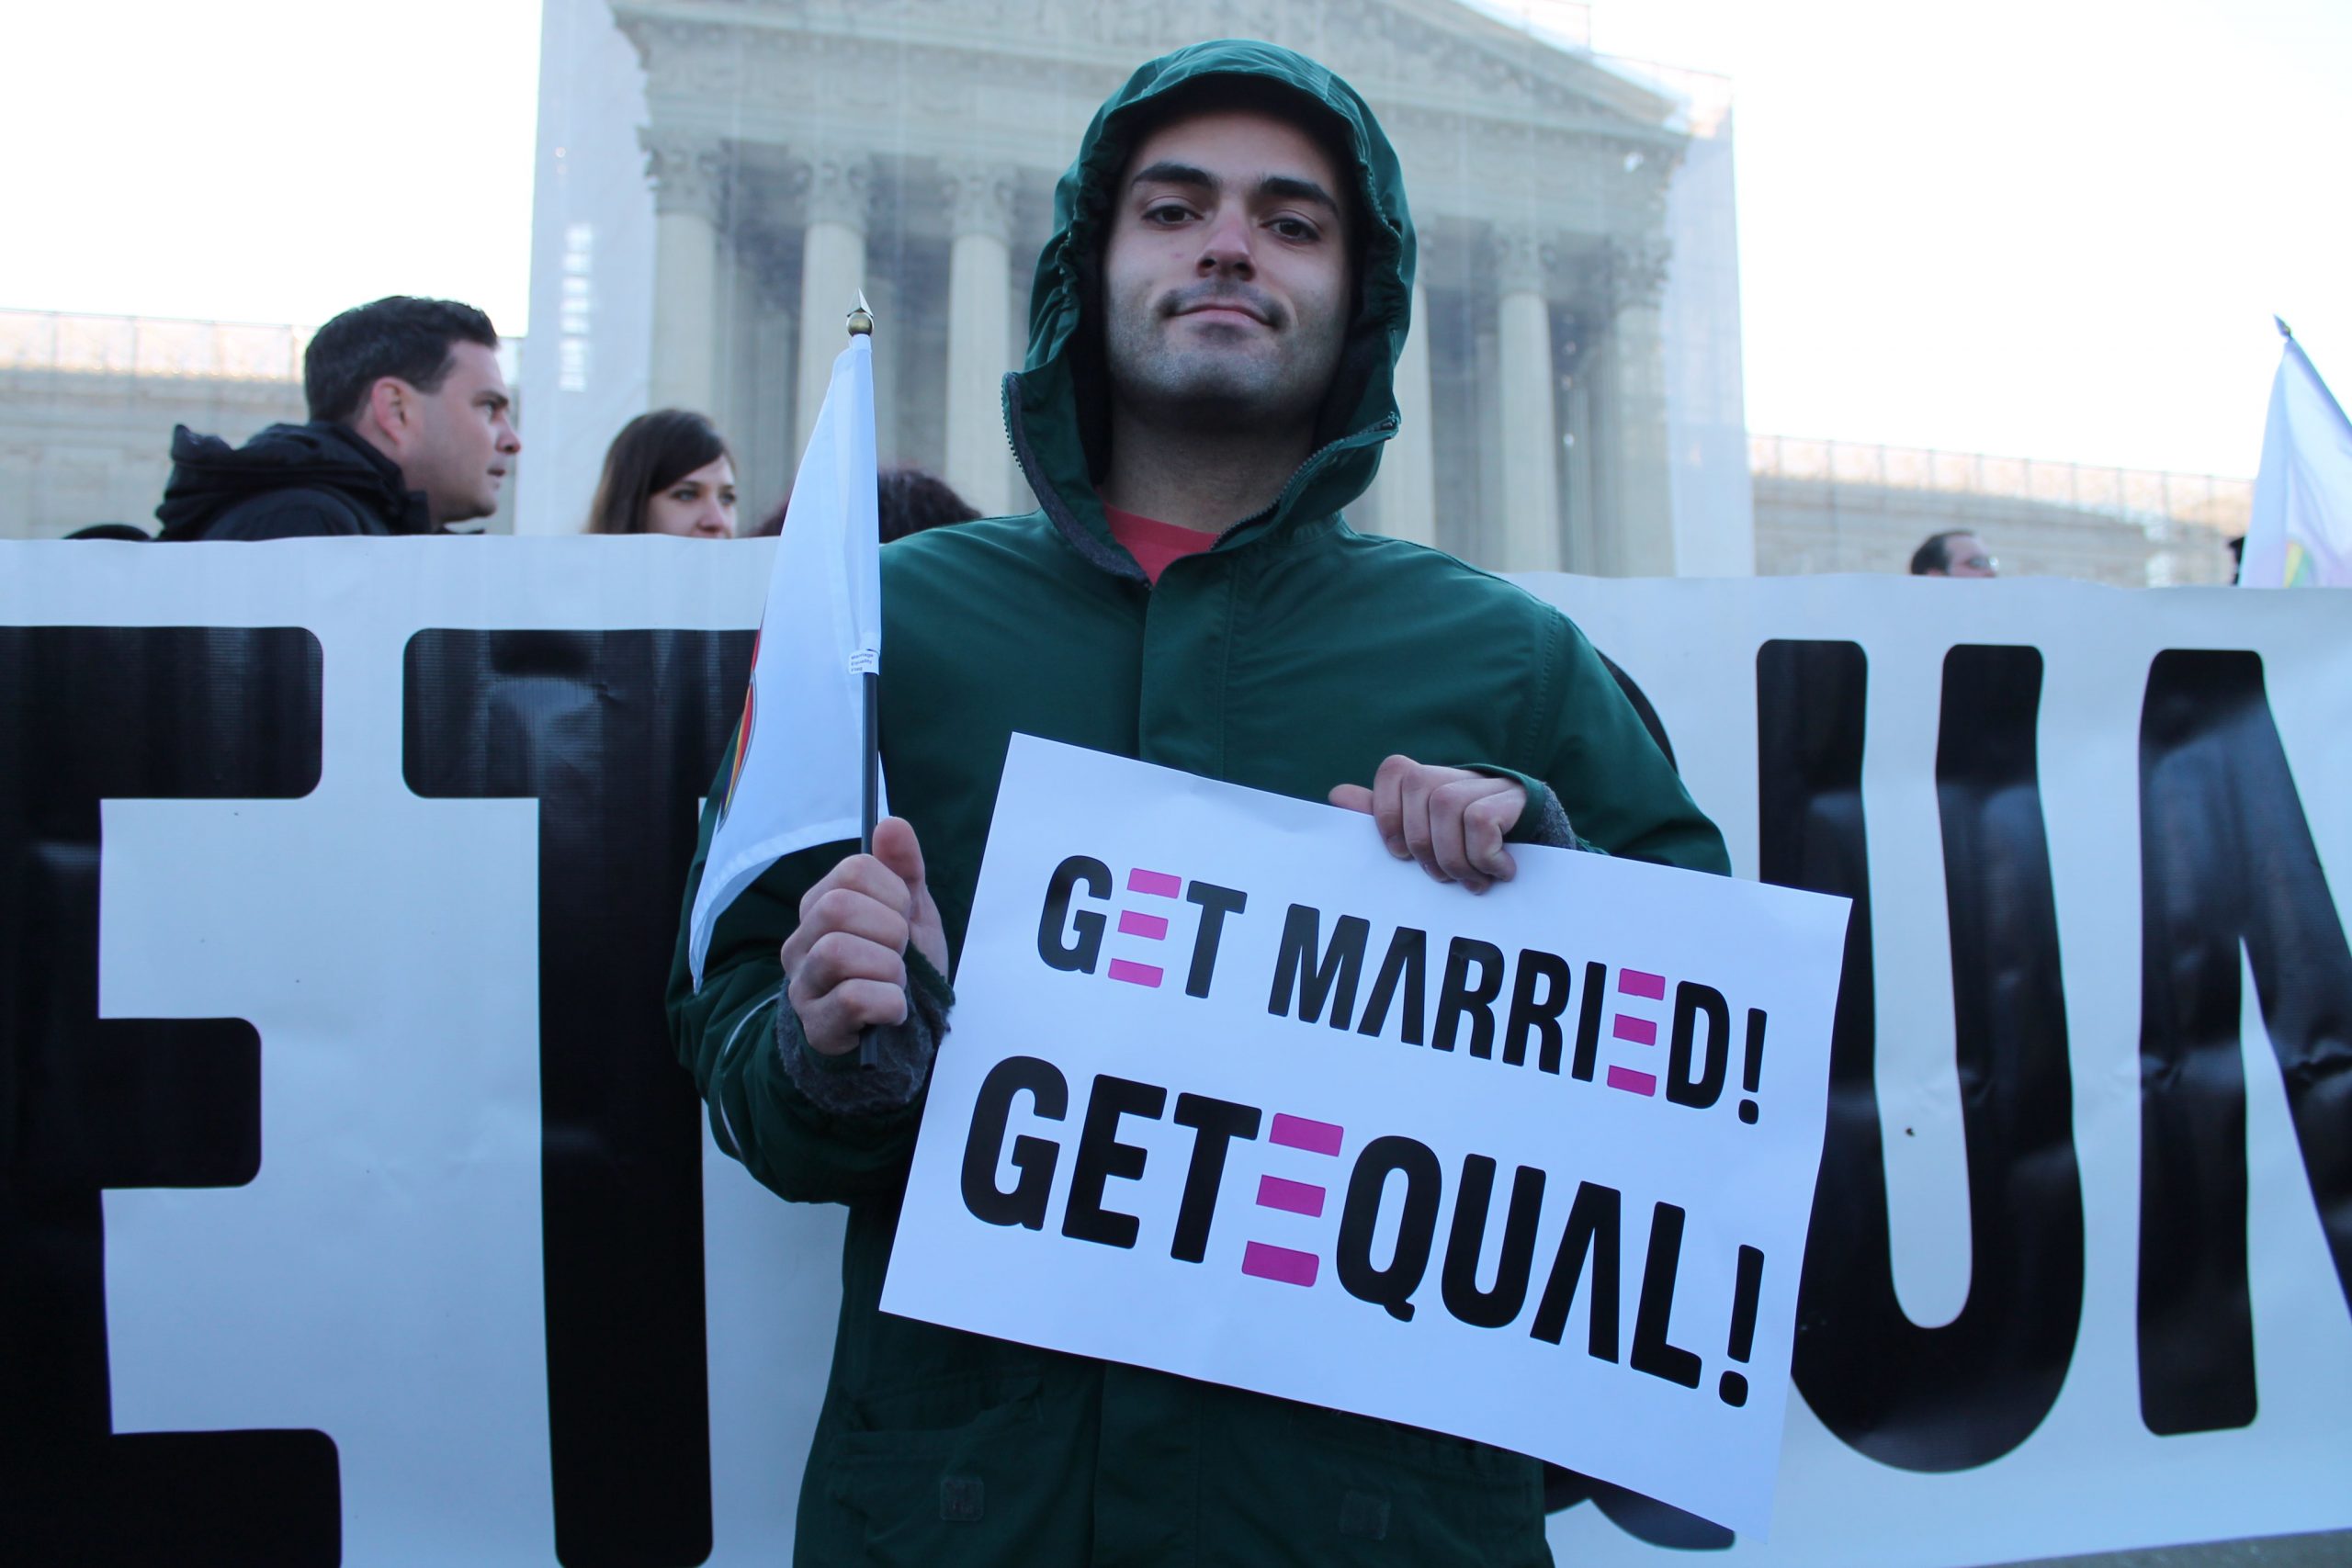 A person holds a sign that says "Get Married! Get Equal!"